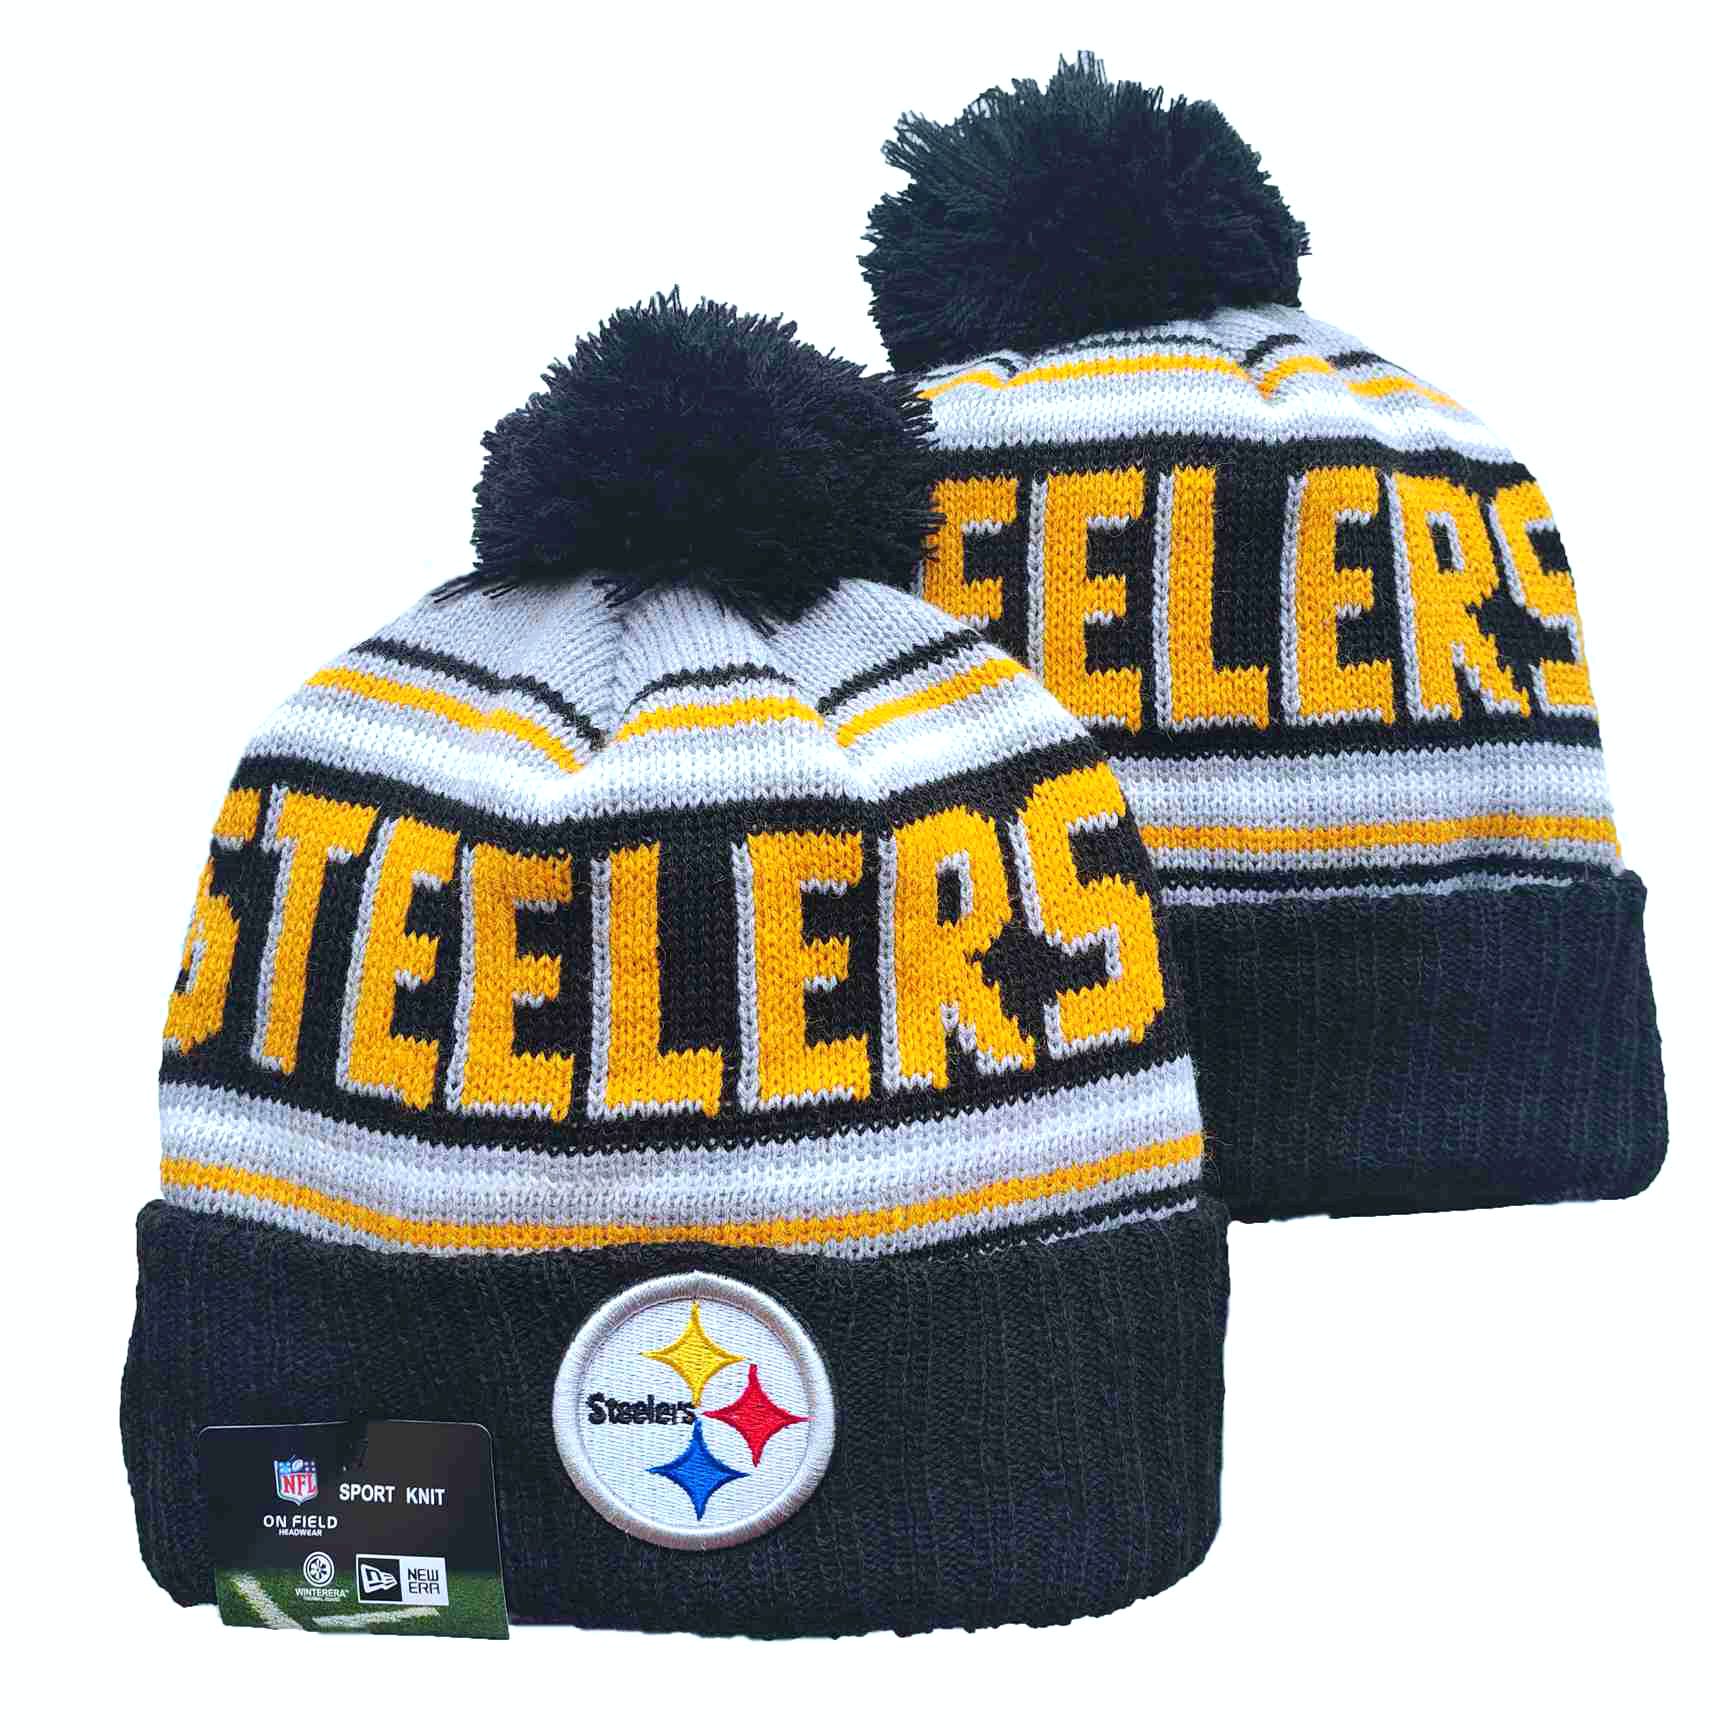 NFL Pittsburgh Steelers Beanies Knit Hats-YD1158